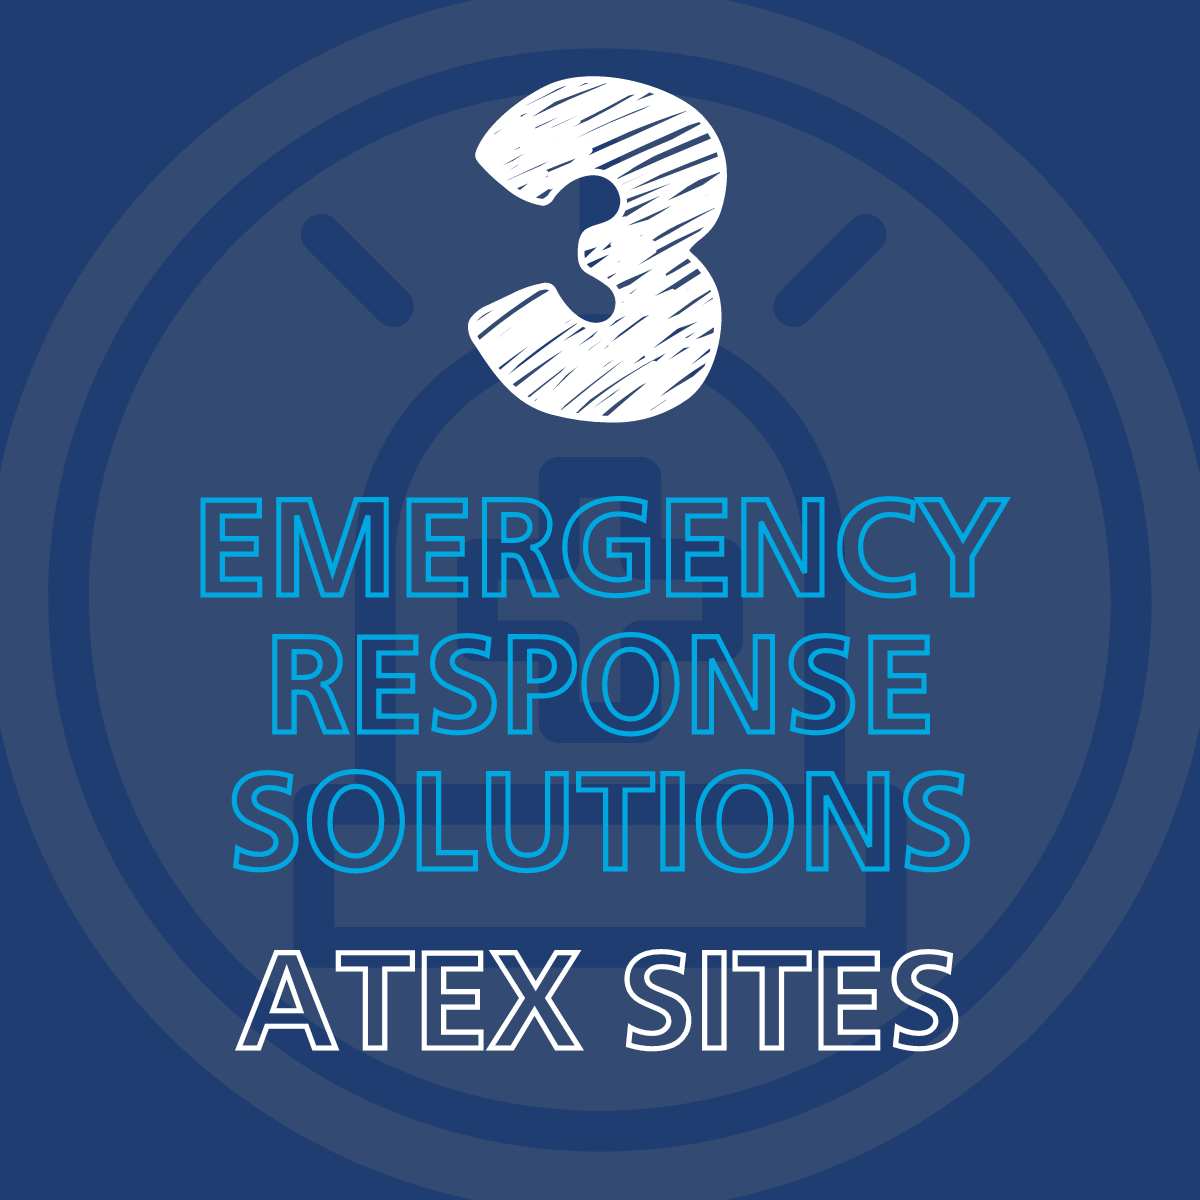 3 Emergency Response Solutions for An ATEX Site